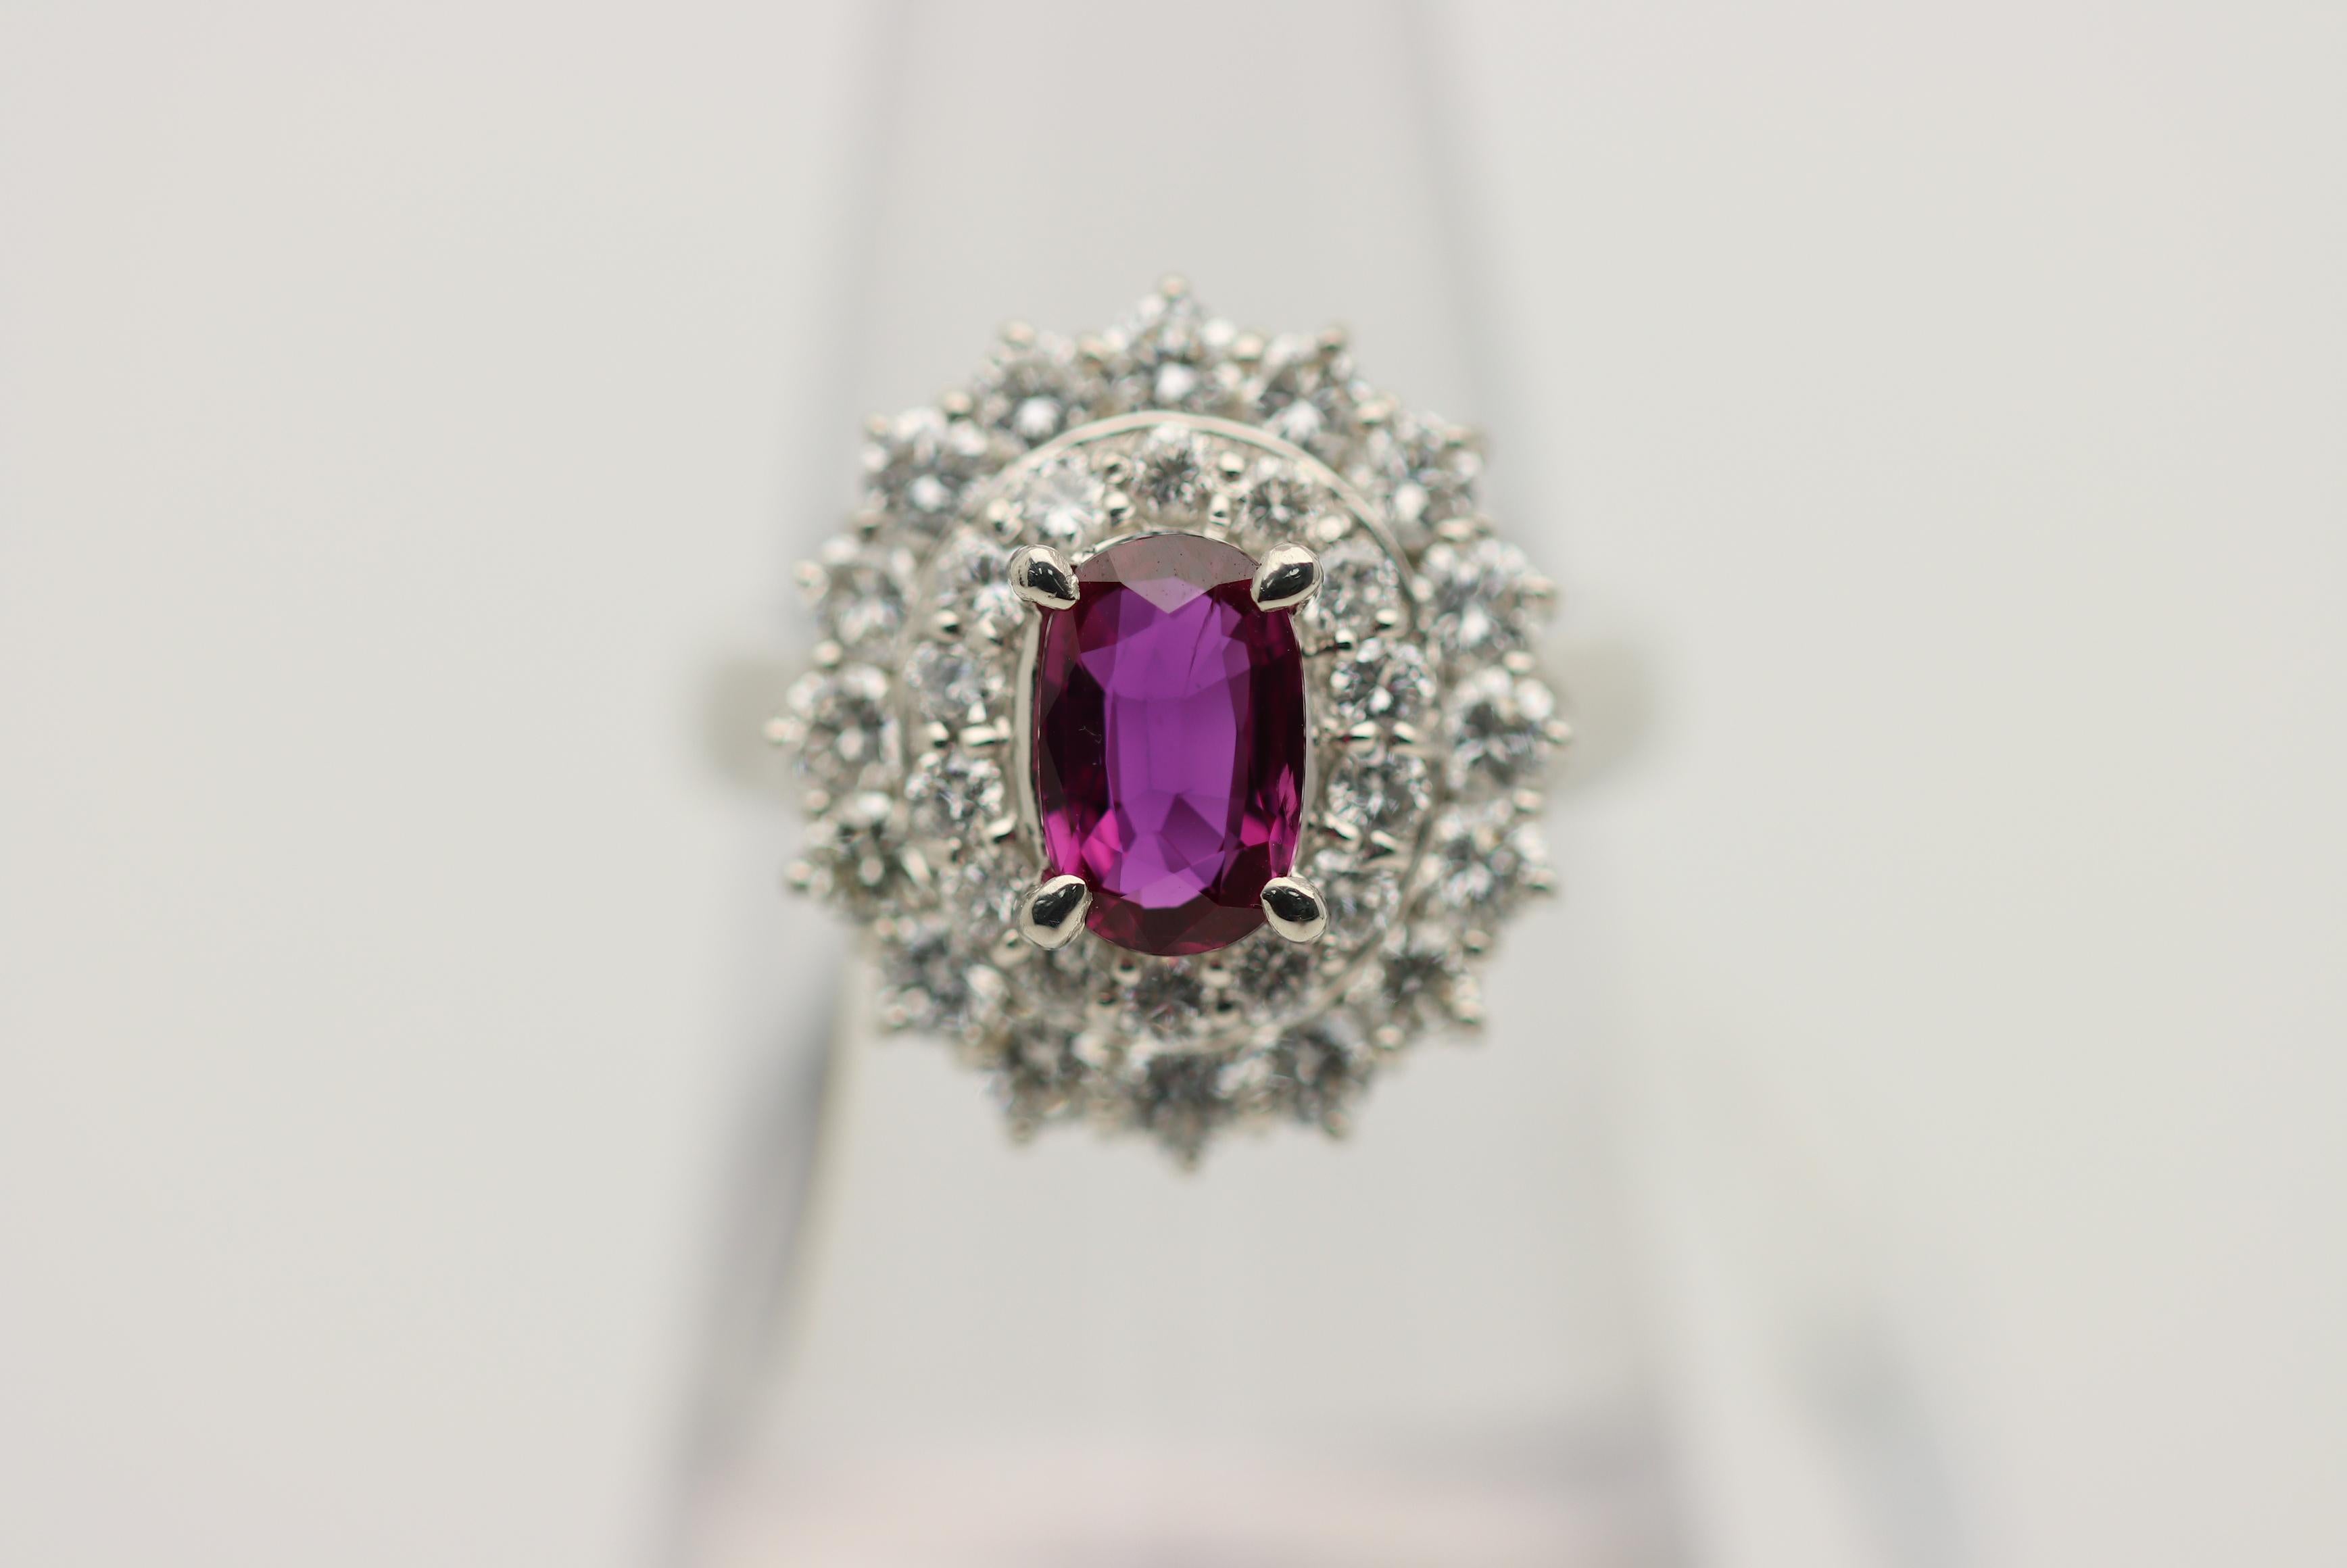 A fine platinum ring featuring a beautiful richly colored purplish-red color weighing 1.36 carats. Adding to that, the ruby is eye-clean with no visible inclusions allowing for great light return and brilliance. It is complemented by 1.62 carats of